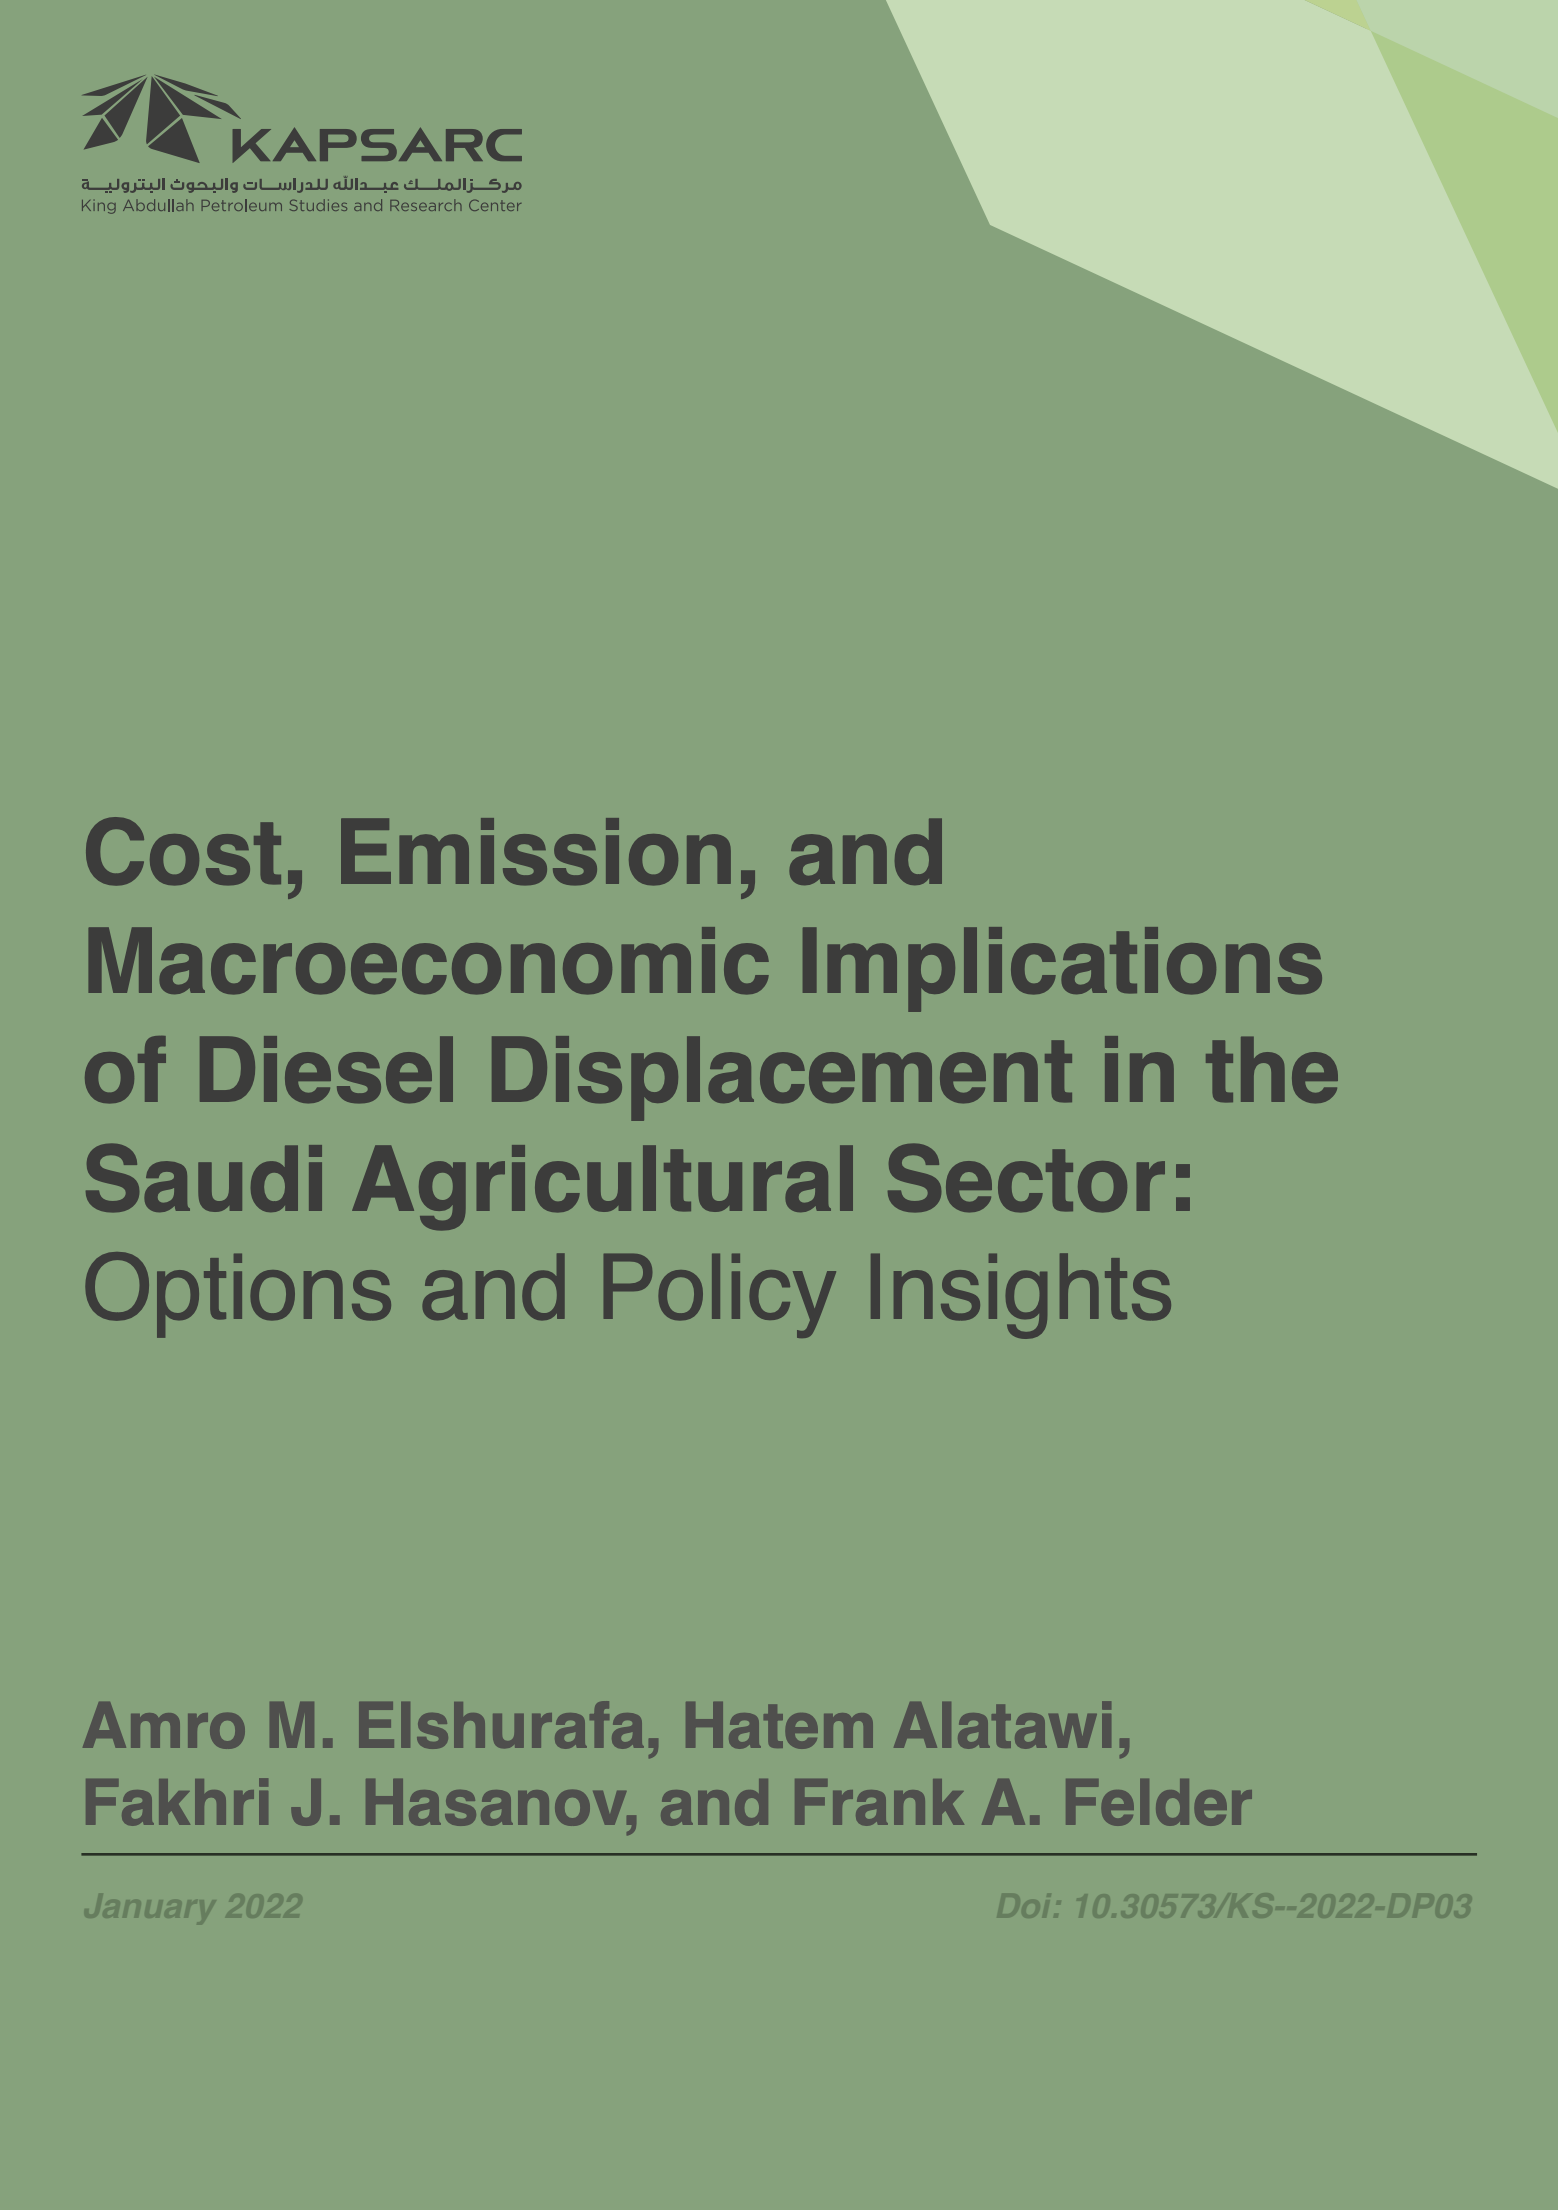 Cost, Emission, and Macroeconomic Implications of Diesel Displacement in the Saudi Agricultural Sector: Options and Policy Insights